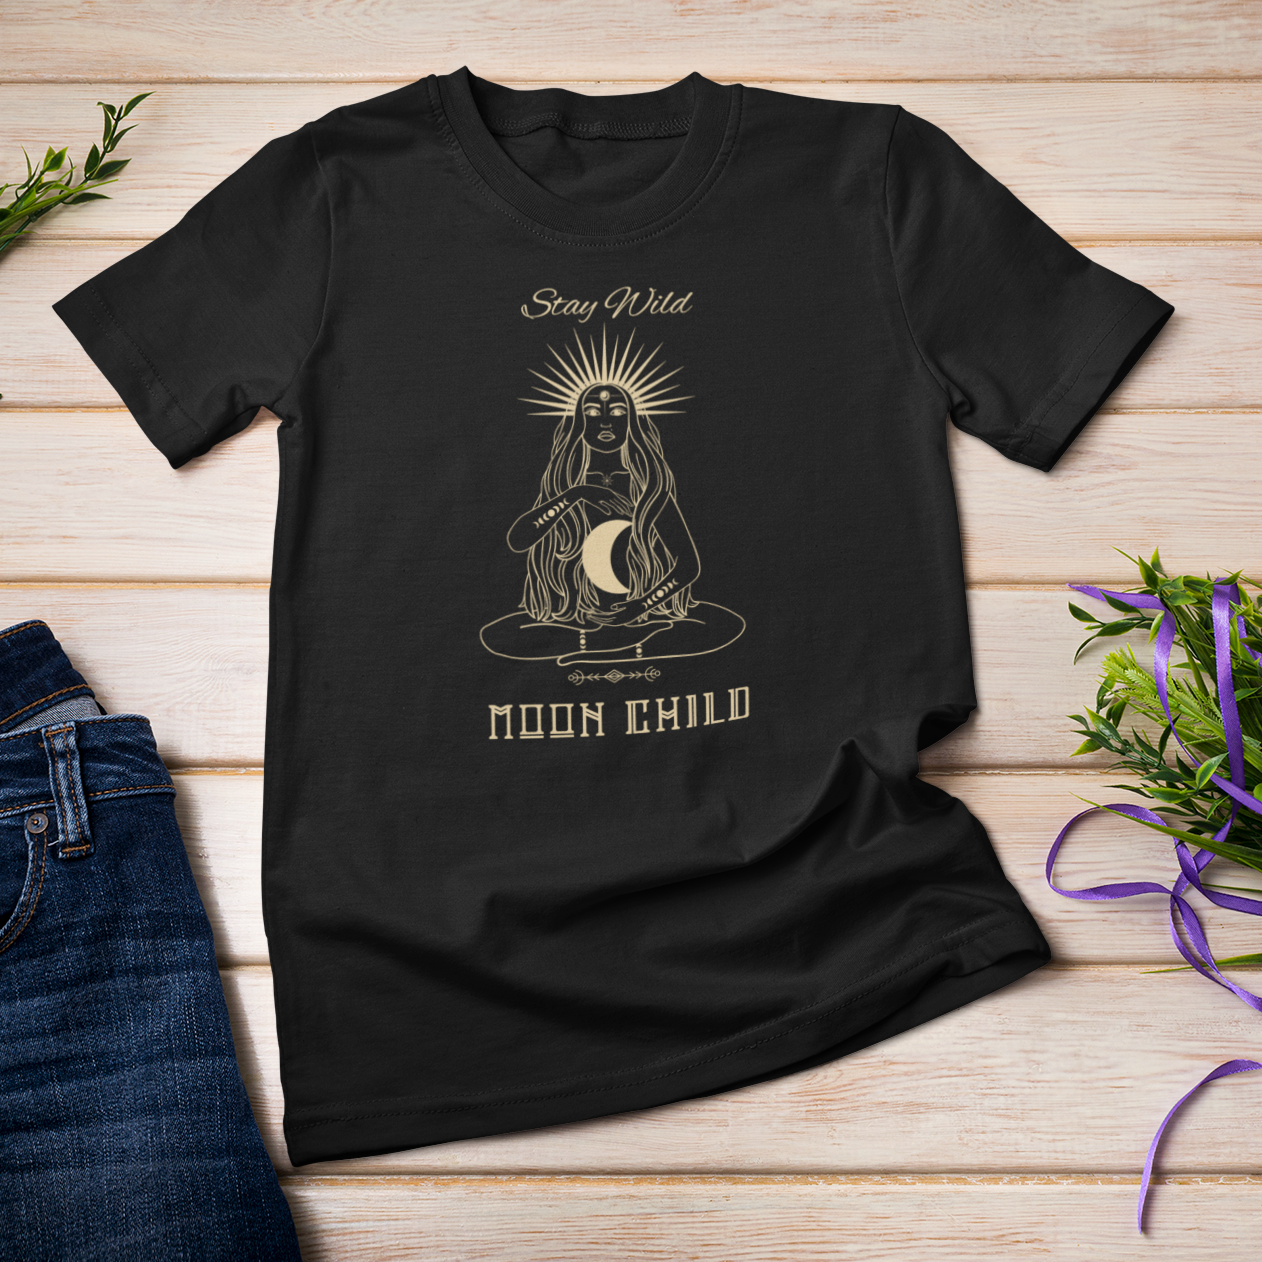 Story of Awakening Lifestyle Community Spirituality Relationships Love Light Meditation Oneness Earth Balance Healing Shop Store Charity Tree Nature Read Write T shirt Tops Tees Clothing Women Horoscope Organic Cotton Stay Wild Moon Child Wicca Witch Quote